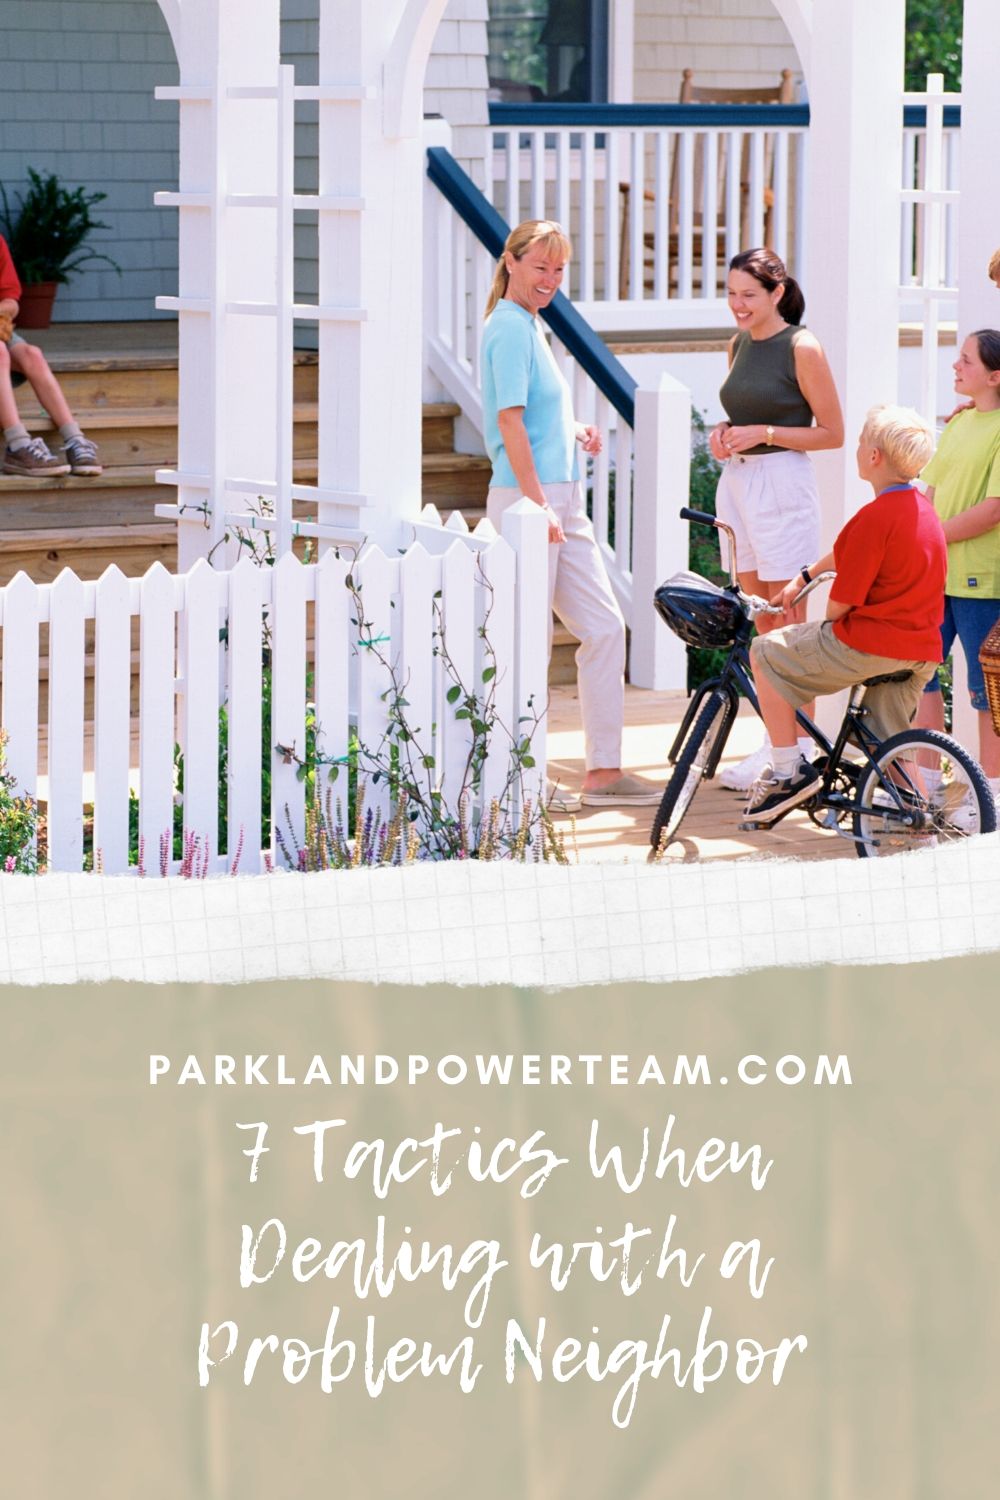 7 Tactics When Dealing with a Problem Neighbor